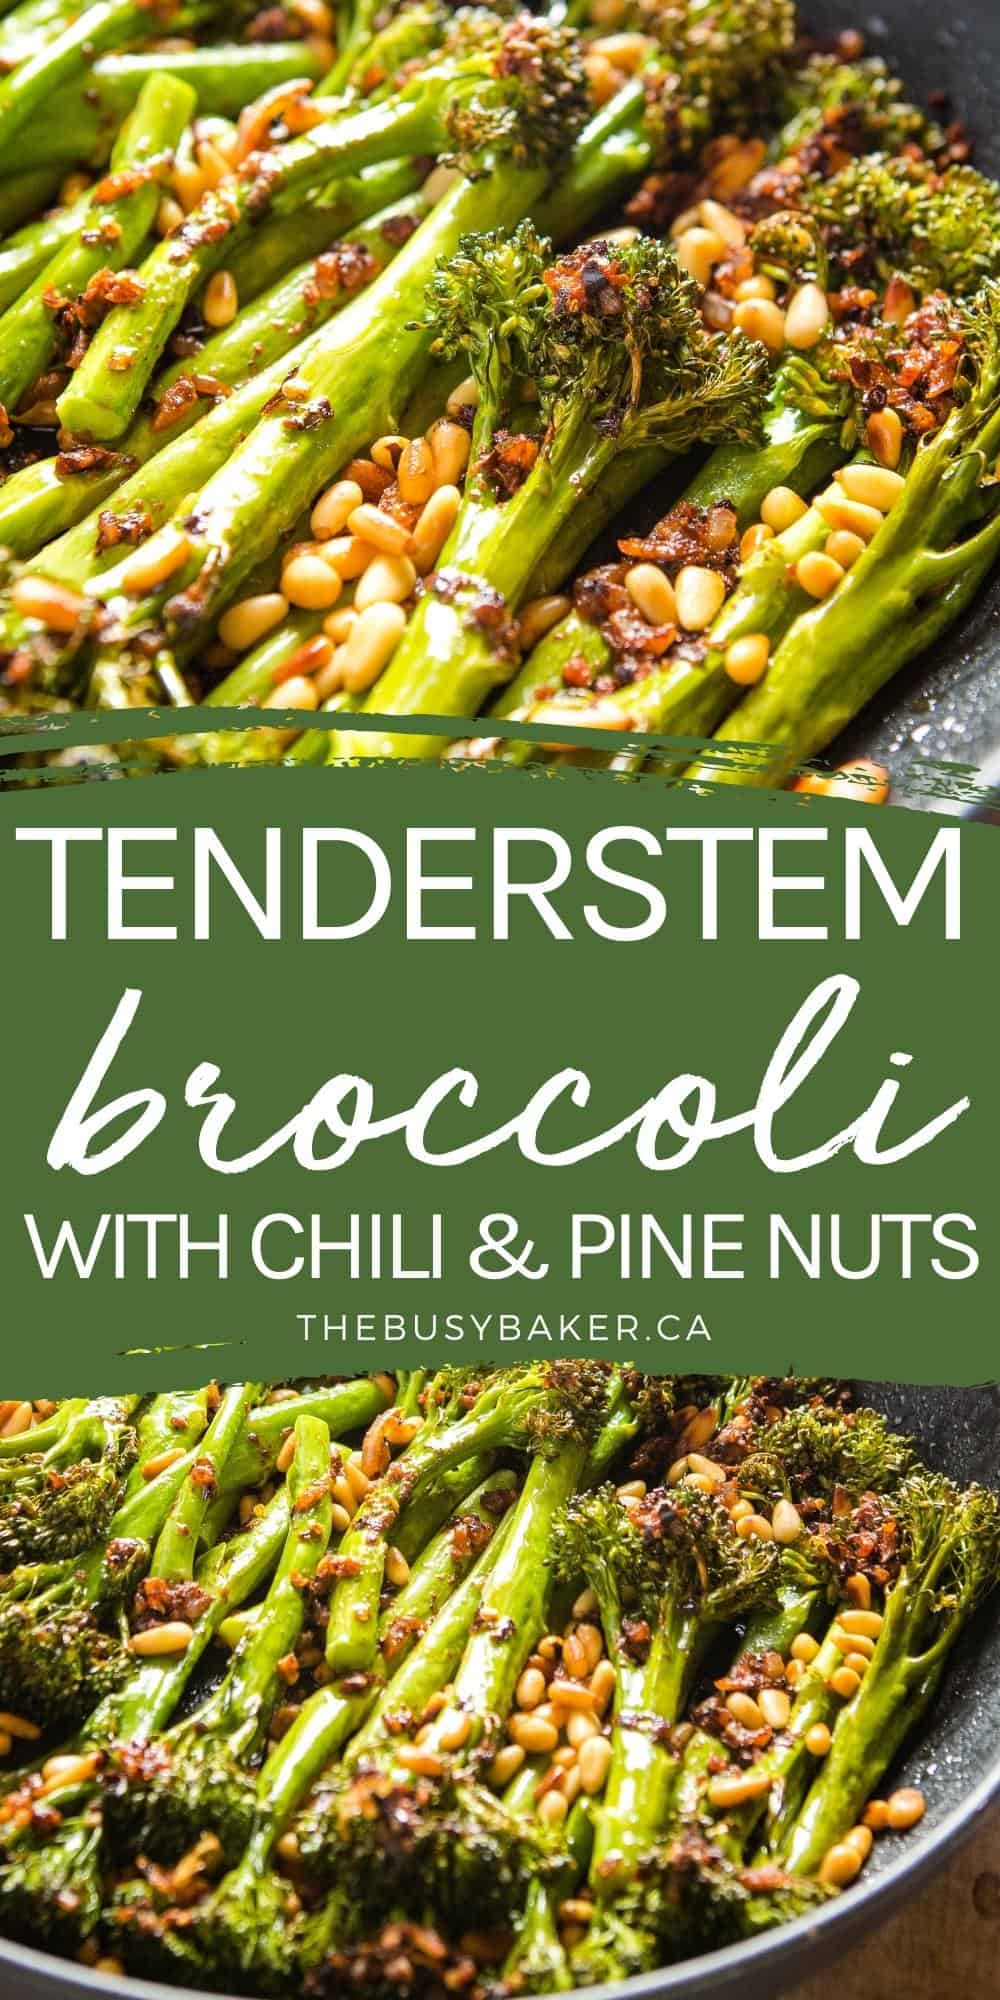 This Tenderstem Broccoli with Chili and Pine Nuts is perfectly savoury with a hint of spice and crunch. The perfect simple side dish! Recipe from thebusybaker.ca! #tenderstembroccoli #broccolini #veggie #sidedish via @busybakerblog